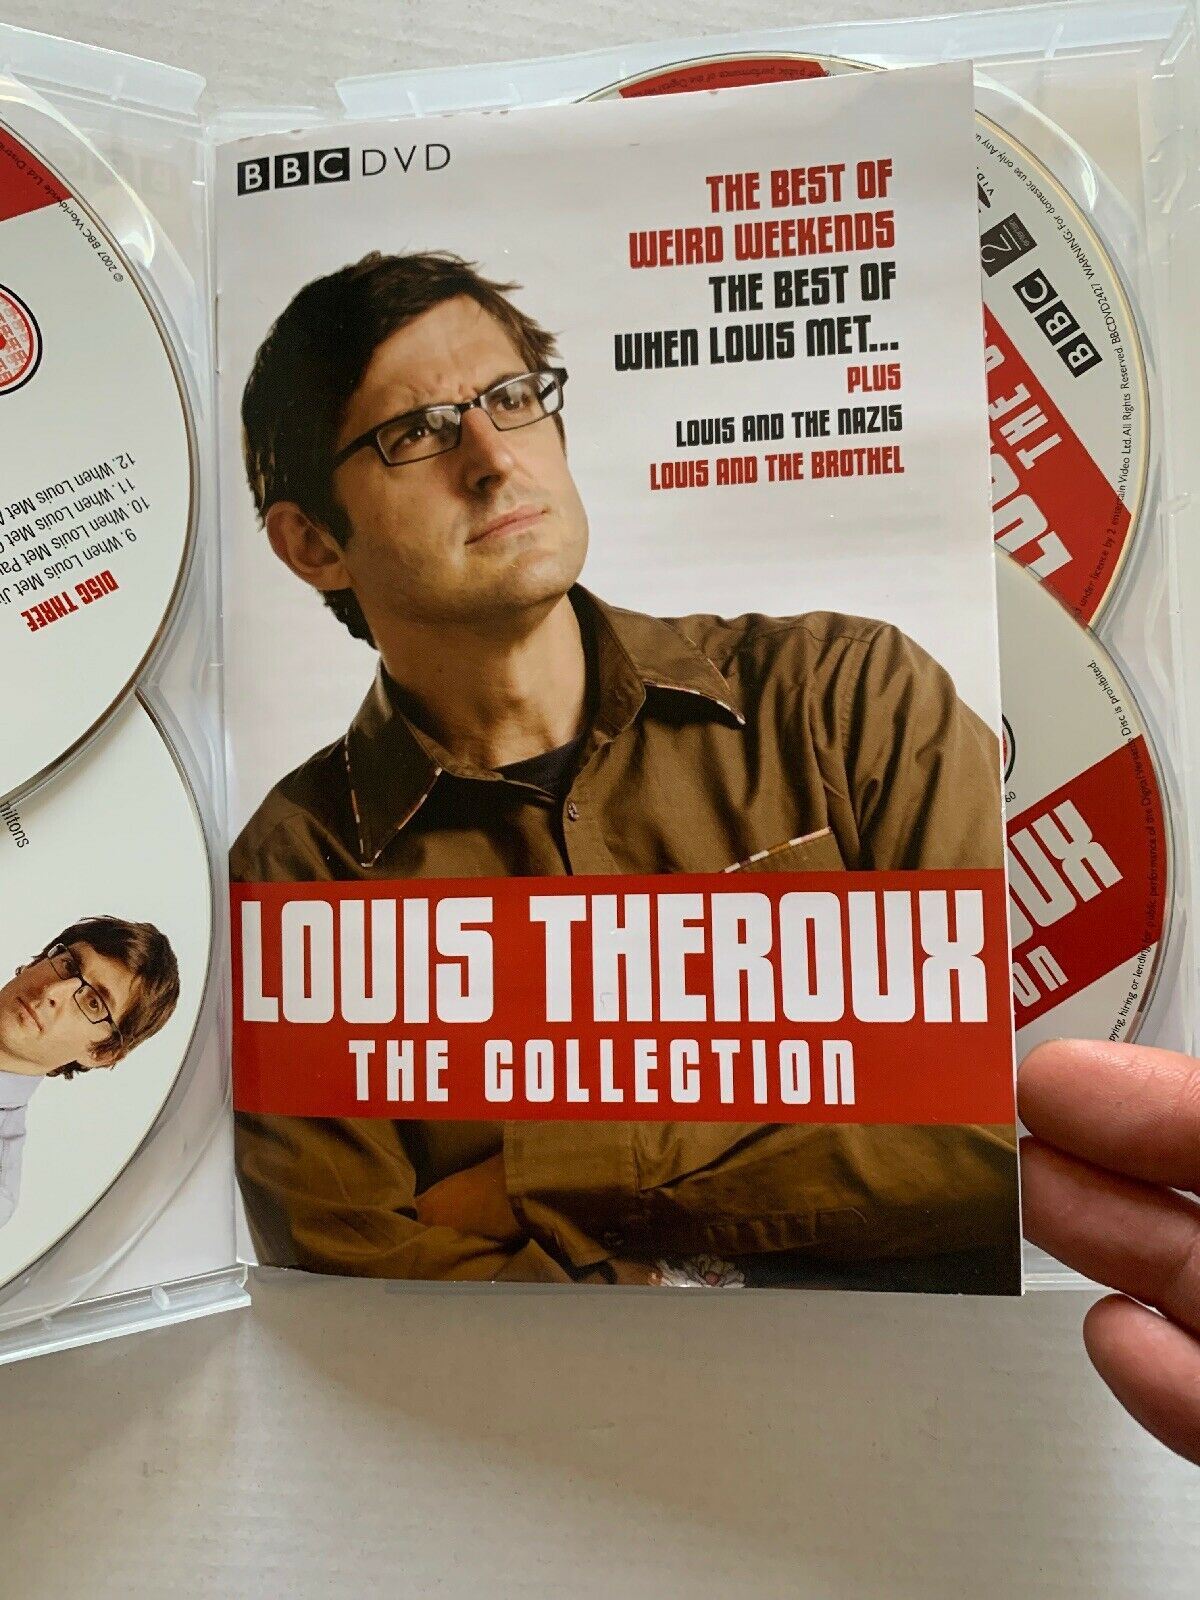  Louis Theroux - The Collection - 4-DVD Box Set ( Weird